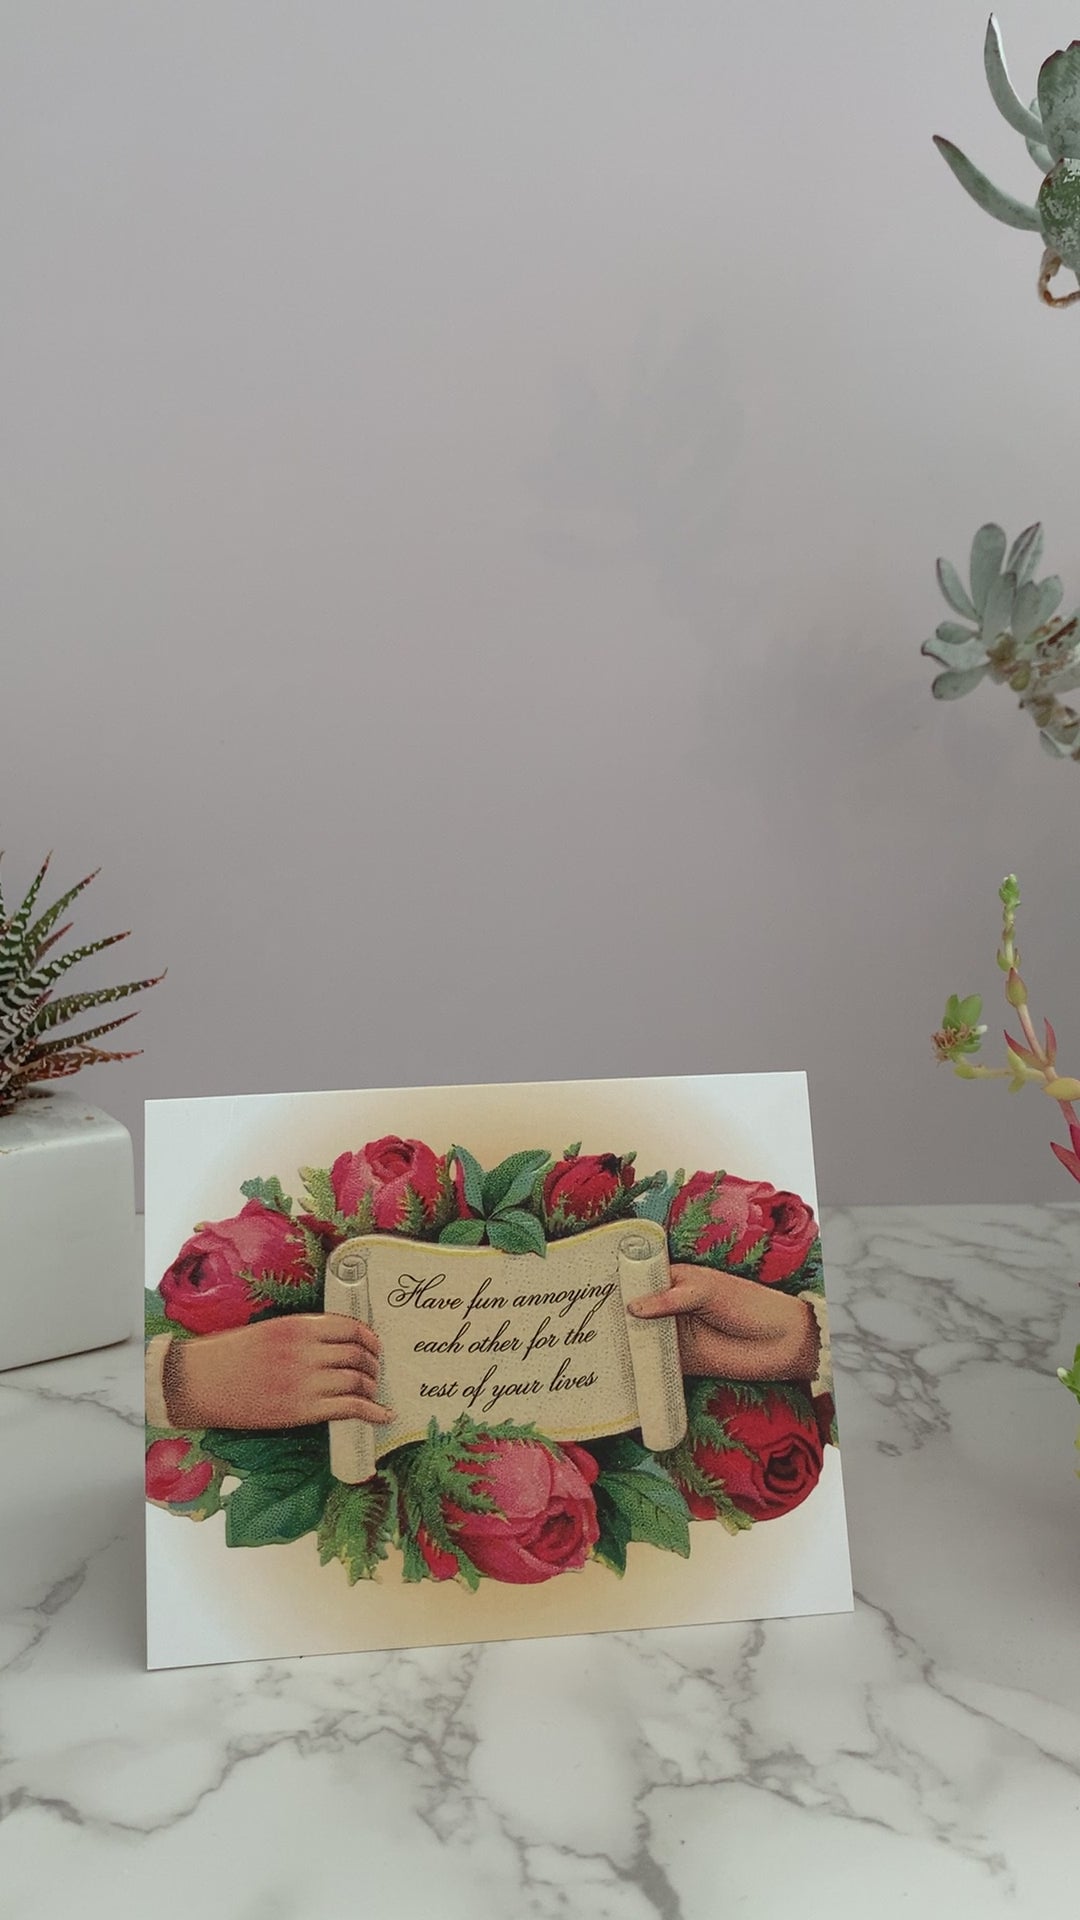 The perfect card for weddings, engagements, and committed partnerships. The front greeting says, "Have fun annoying each other for the rest of your lives." on a paper scroll, being held open by a hand on each side. Red roses surround the image. Vintage inspired. Blank inside.